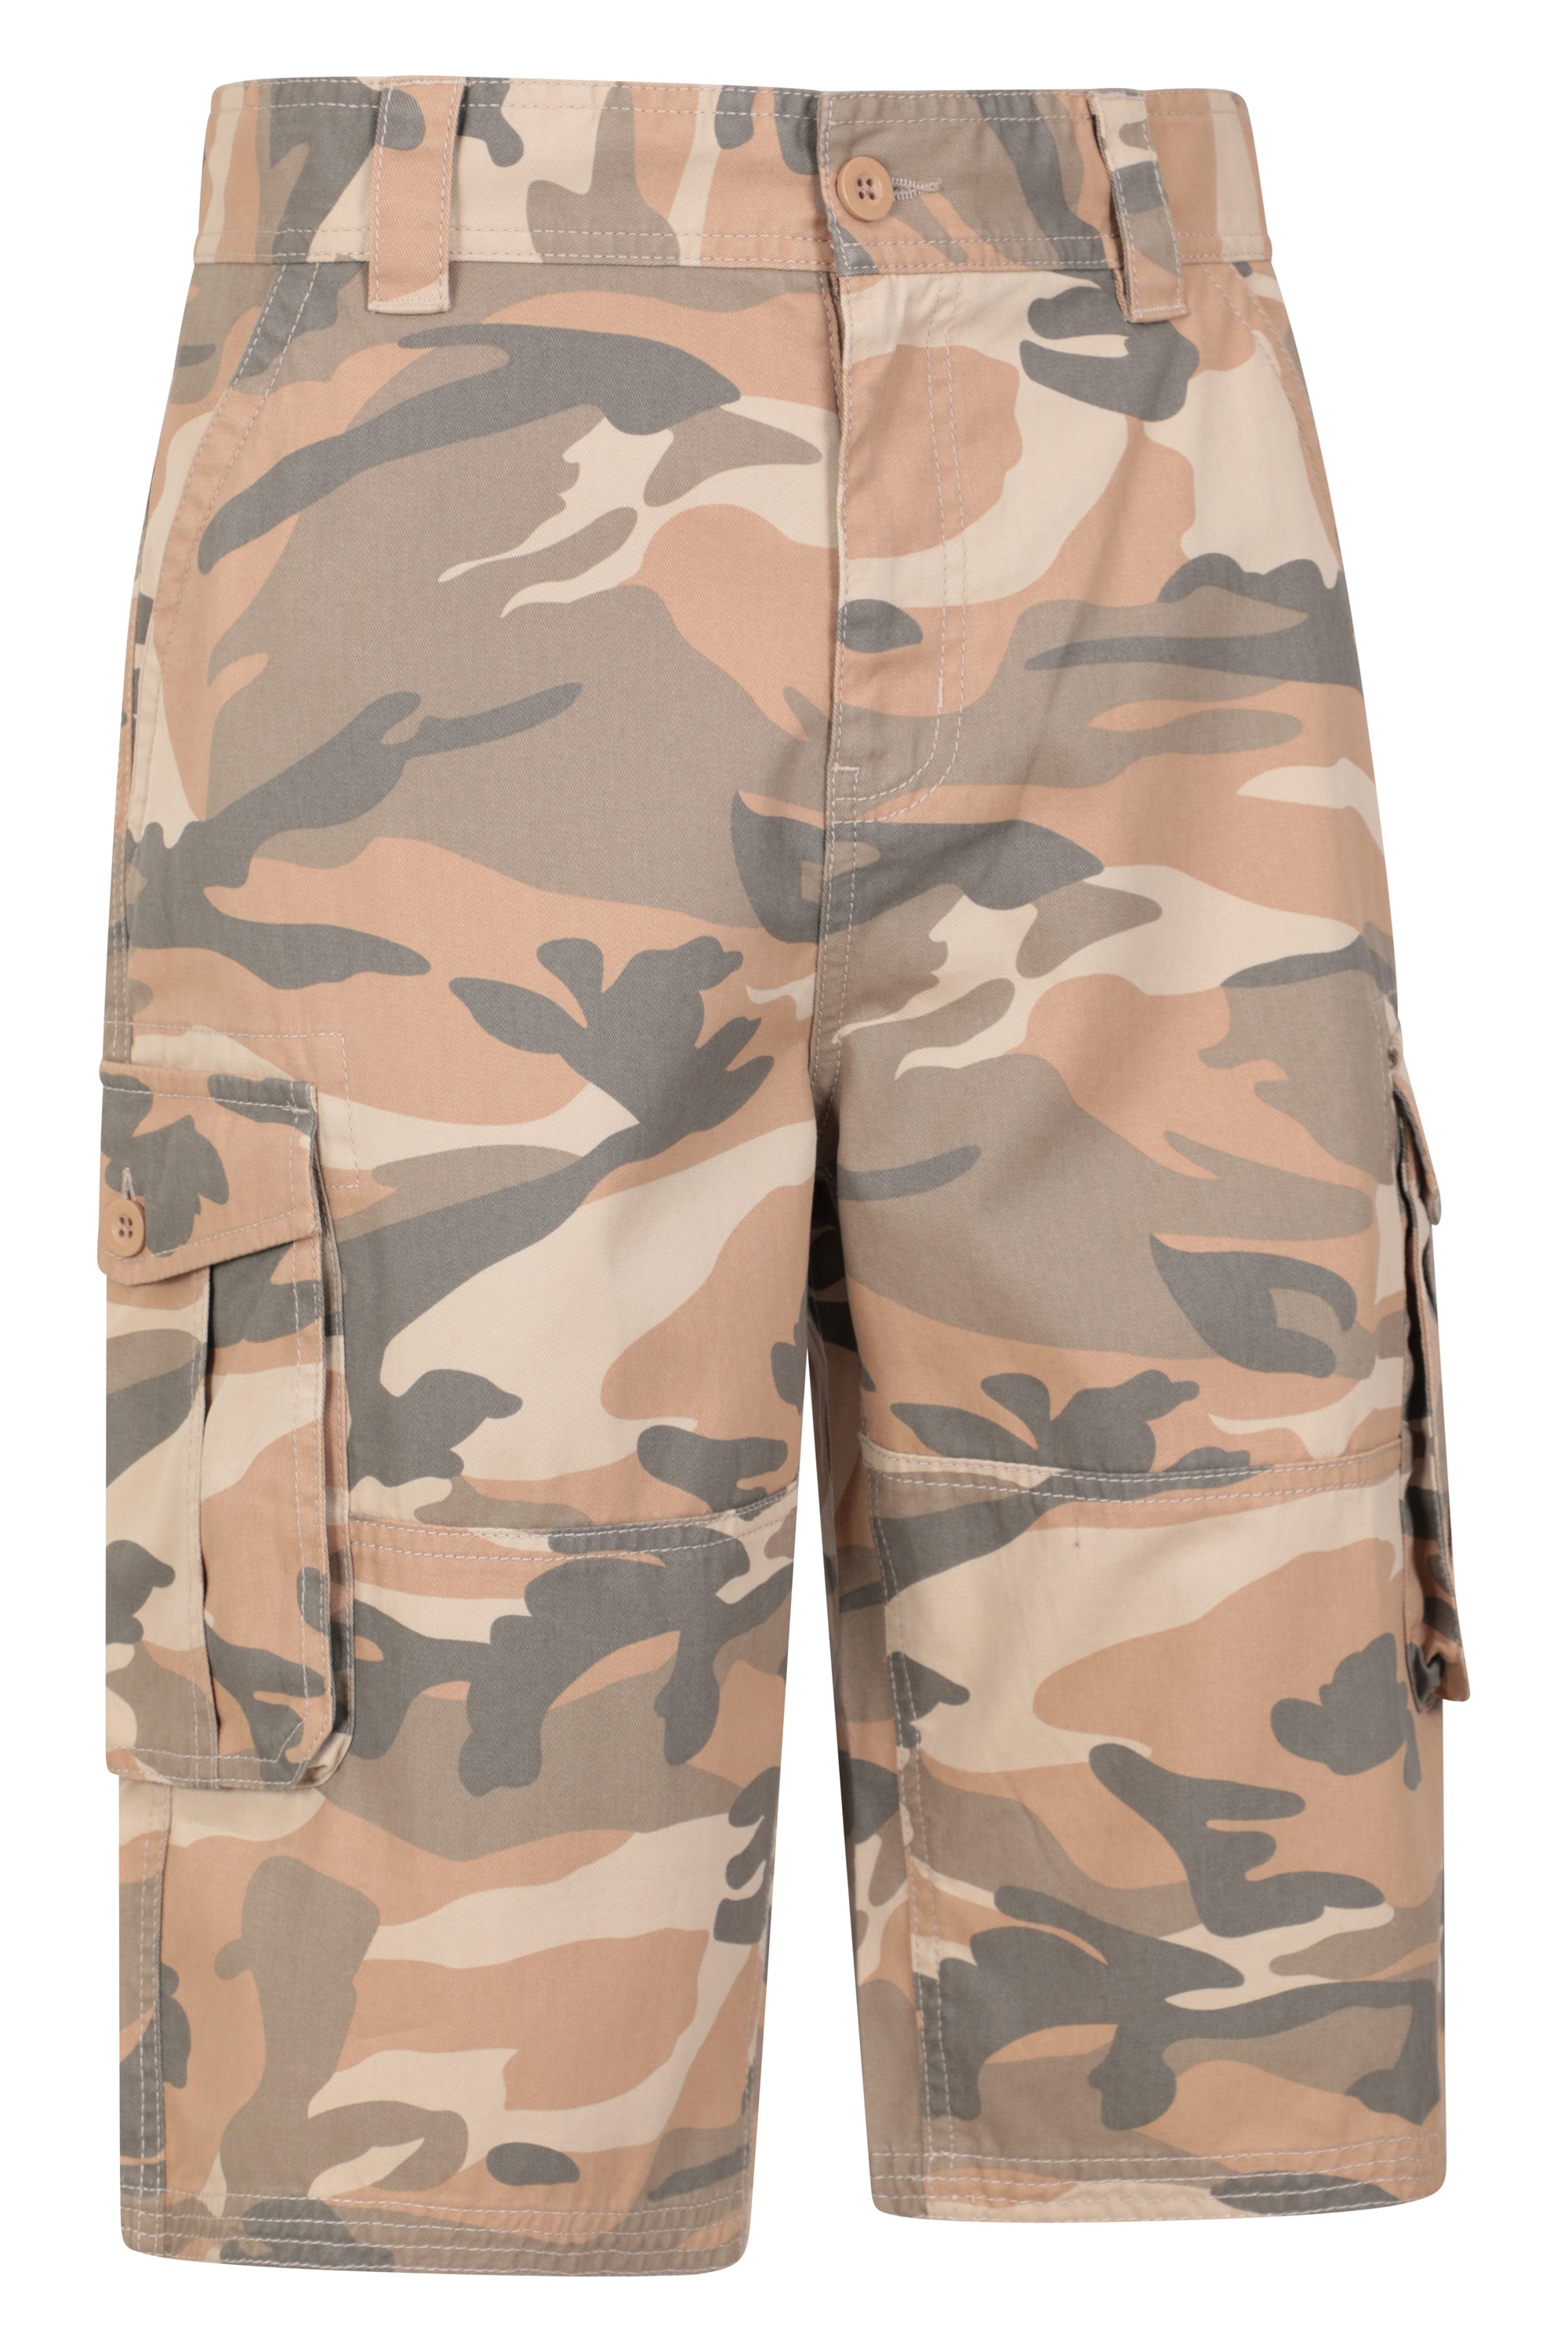 Muscle Alive New York Men's Cargo Camo Shorts 38 37 x 9 inseam Outdoor  Hiking